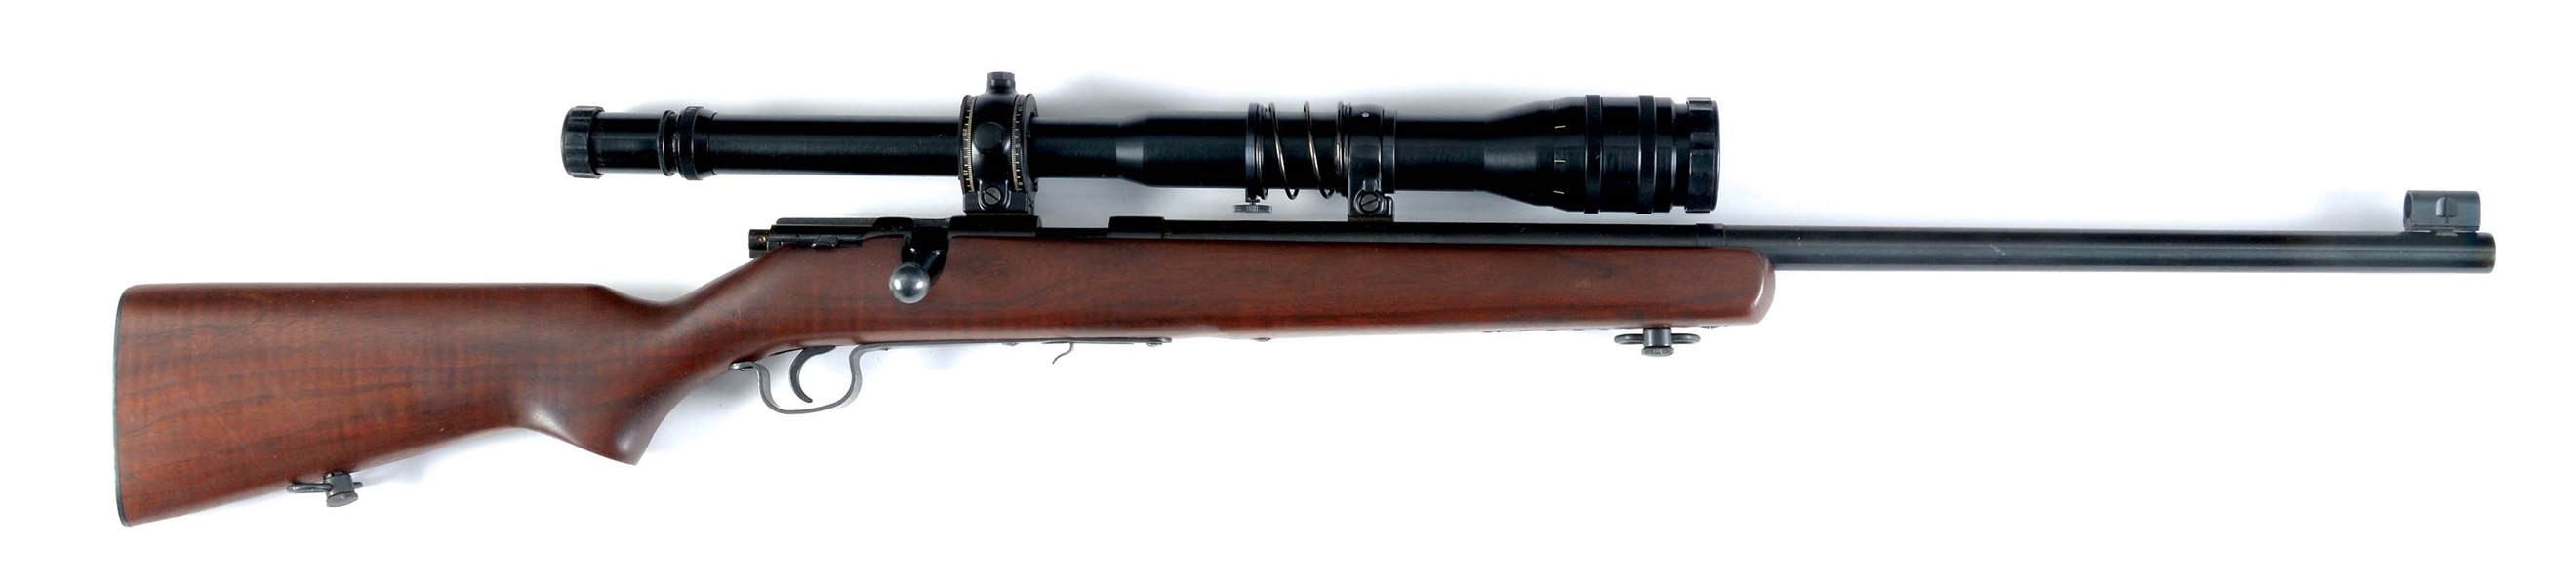 (M) STEVENS 416 BOLT ACTION RIFLE WITH SCOPE.